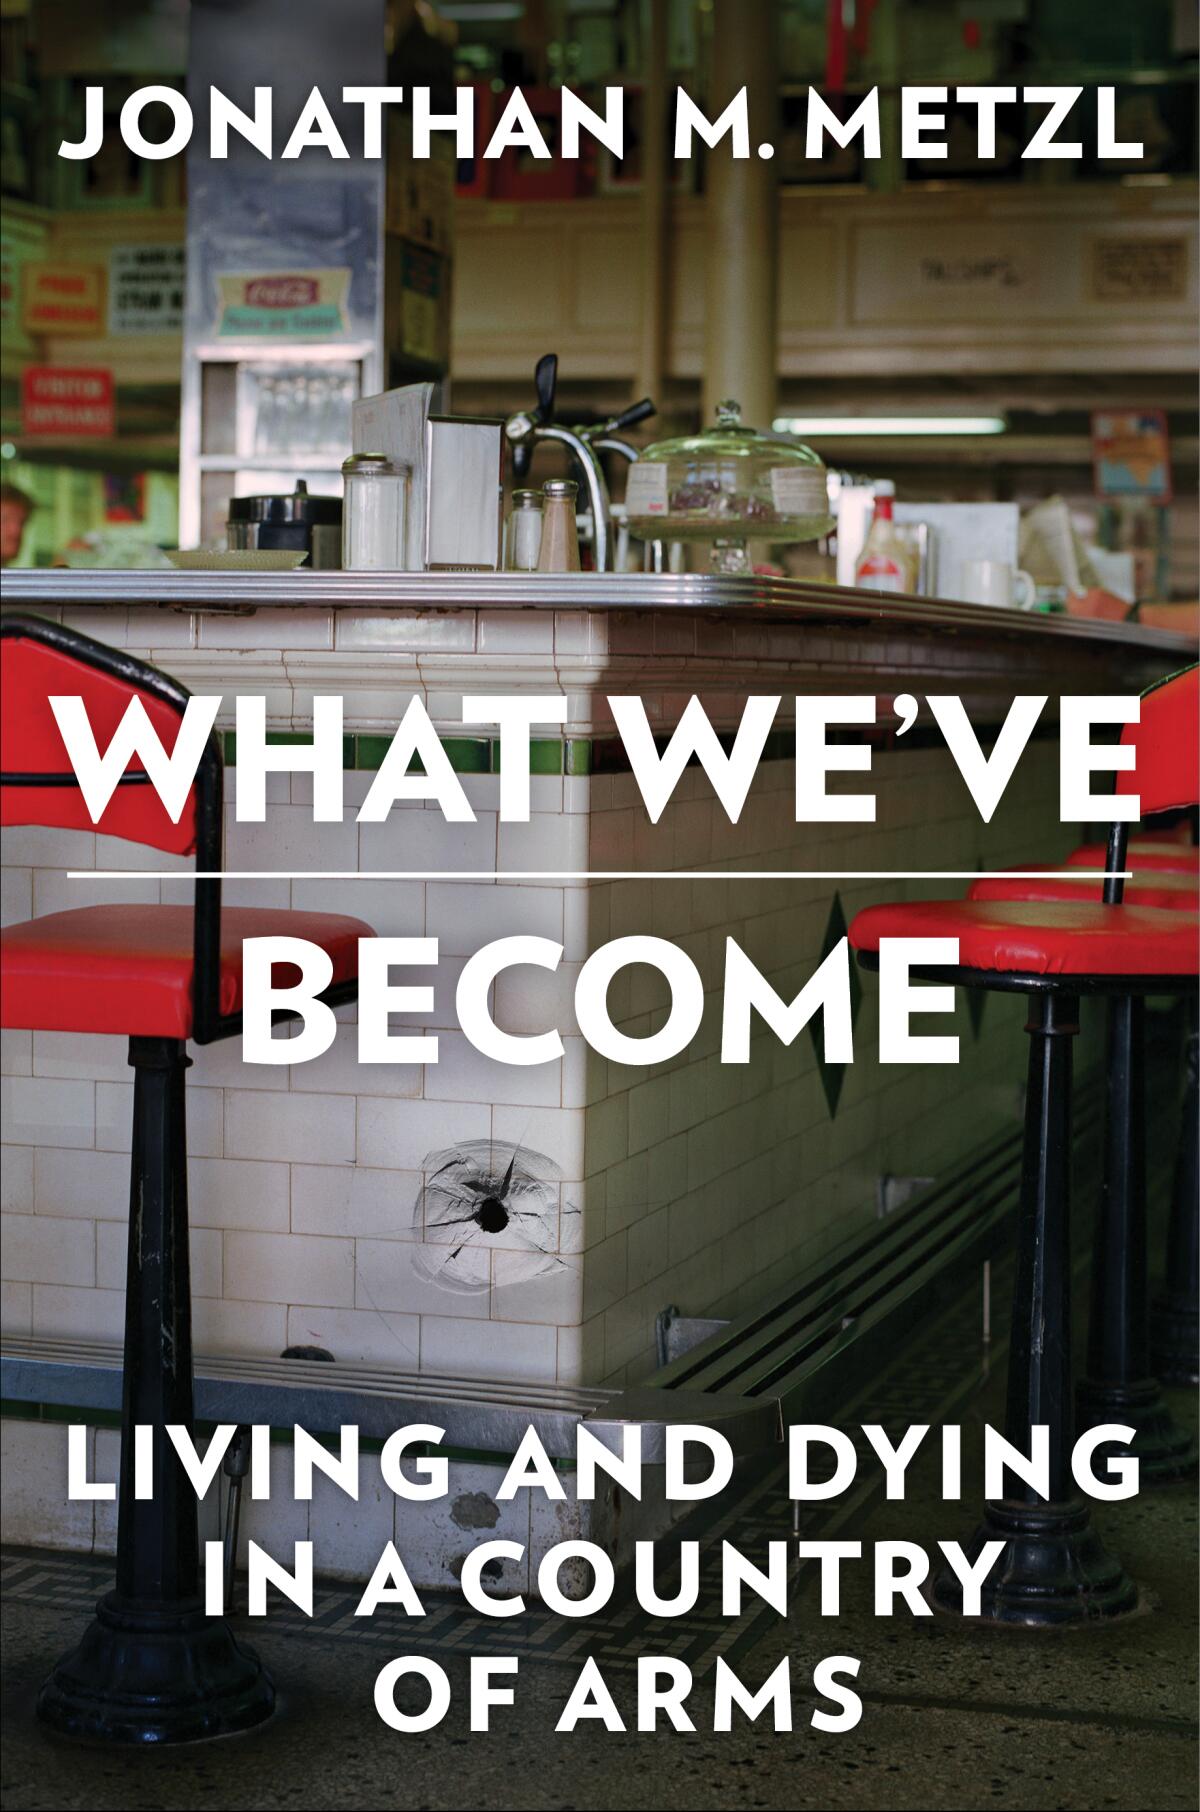 "What We've Become: Living and Dying in a Country of Arms" by Jonathan M. Metzl